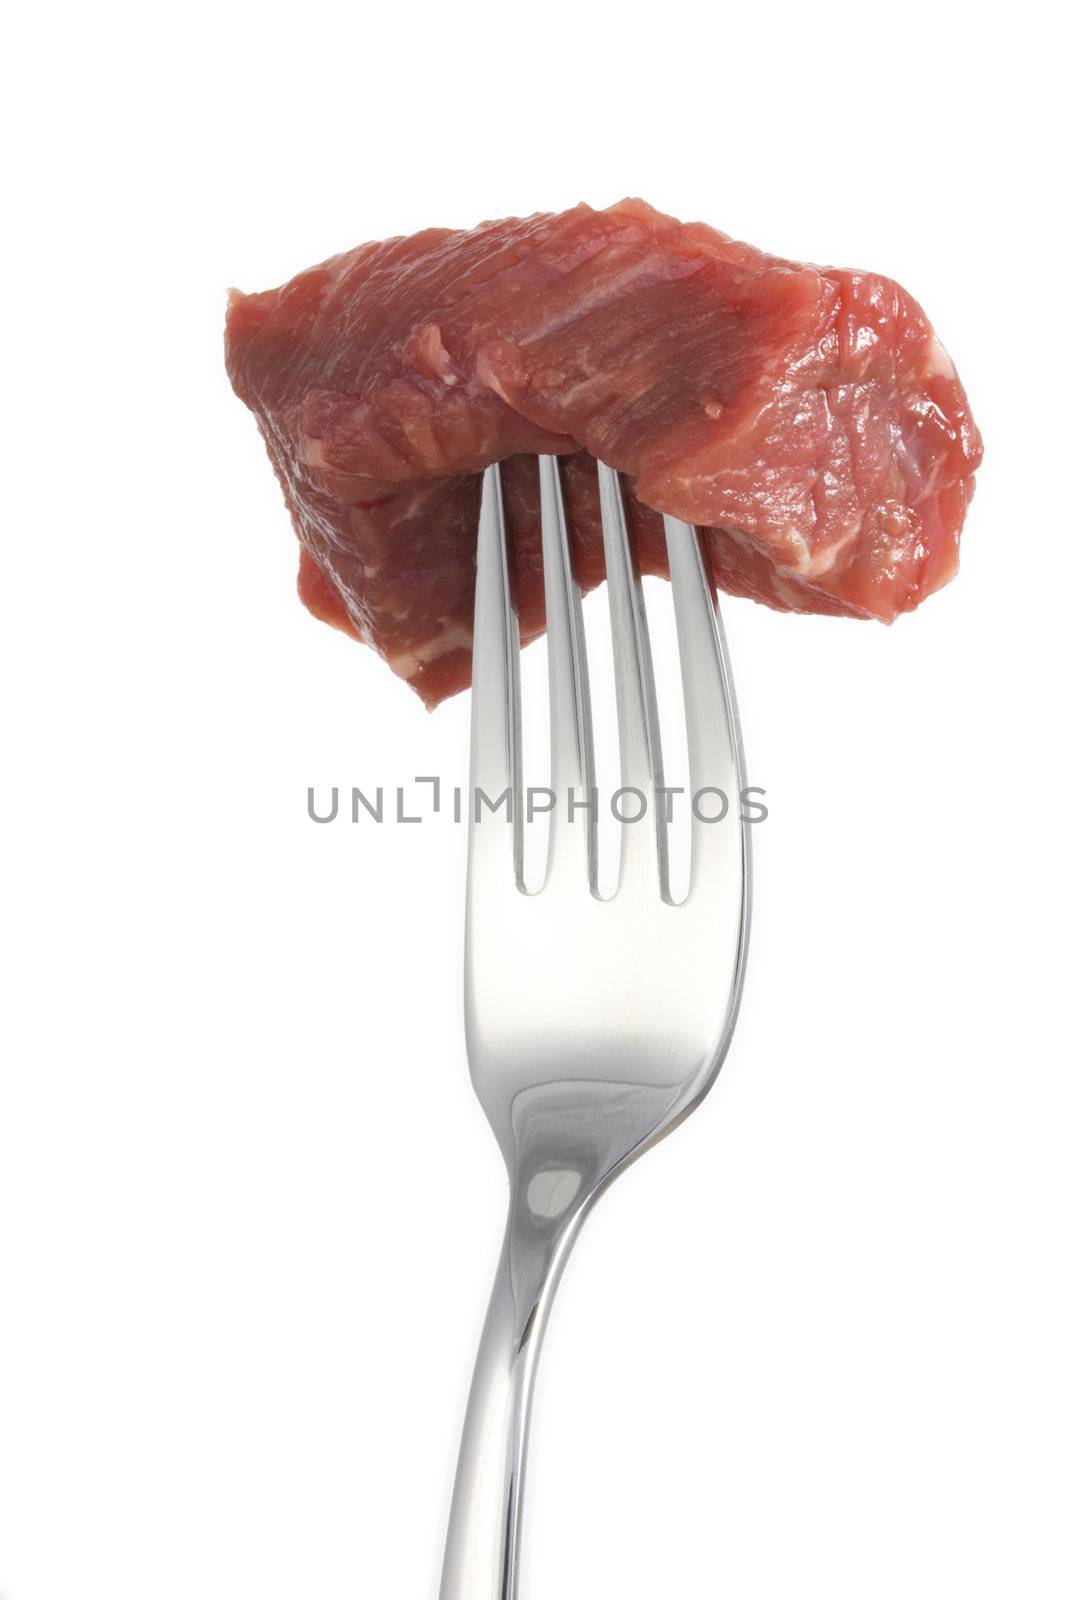 piece of meat on a fork isolated on white background